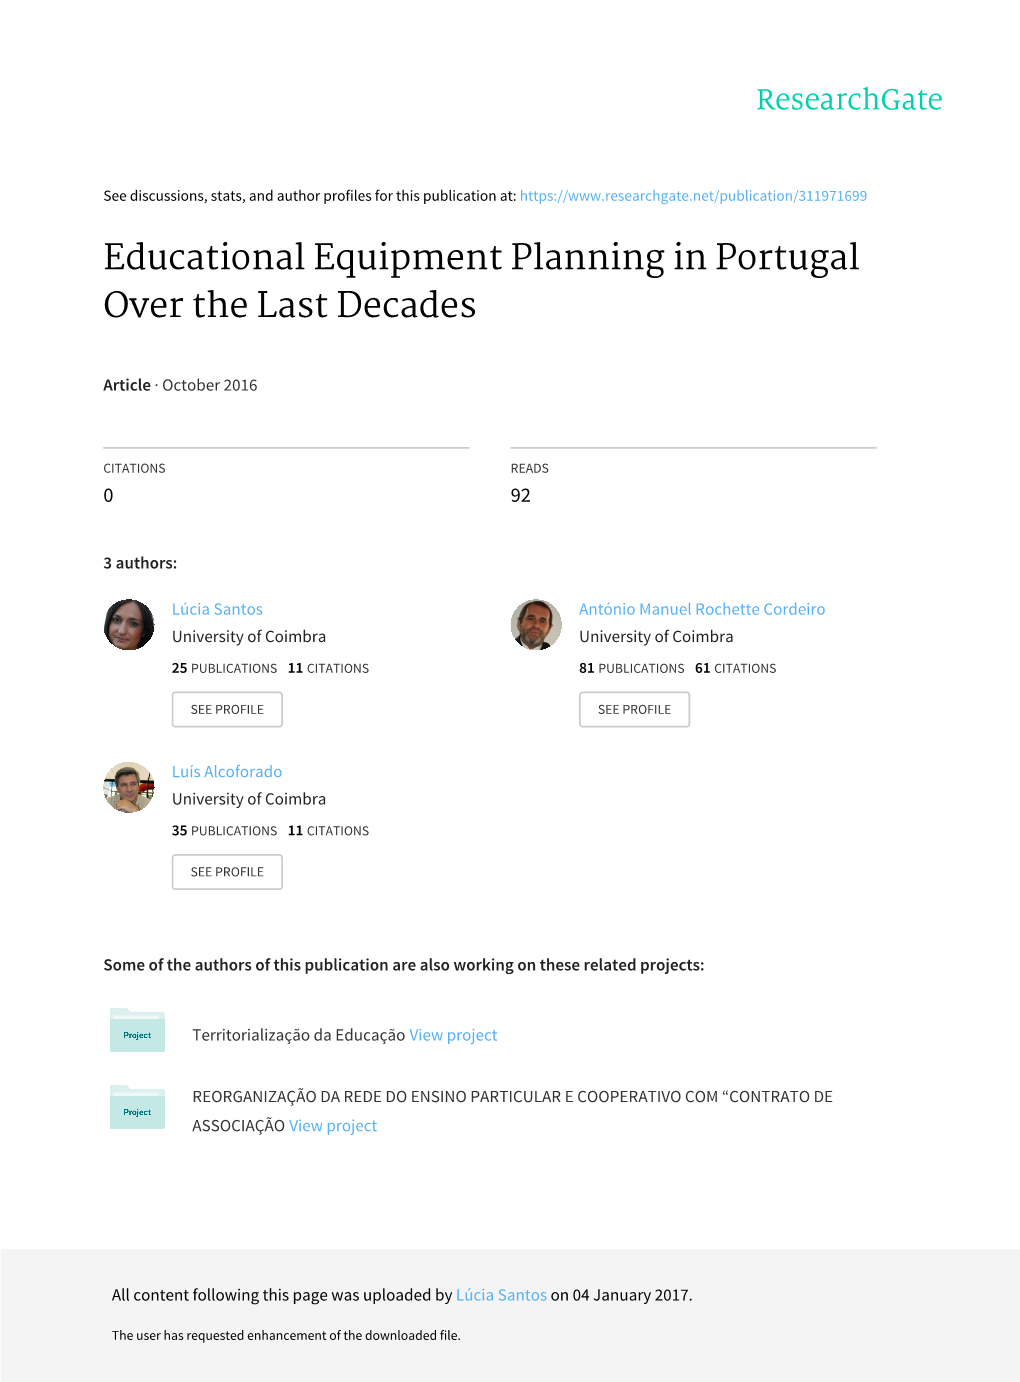 Educational Equipment Planning in Portugal Over the Last Decades